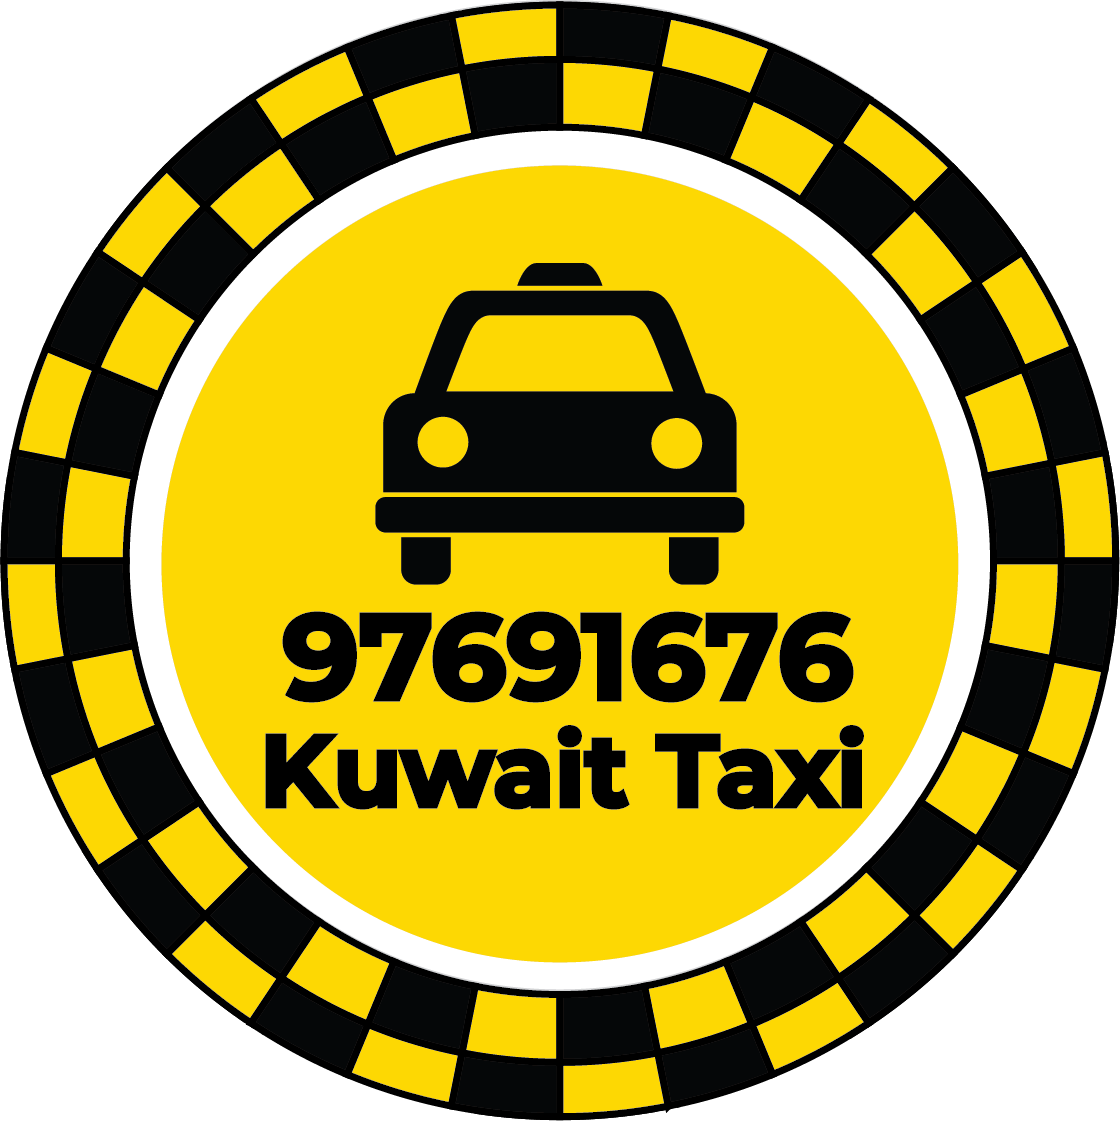 kuwait taxi service - Kuwait Taxi Number